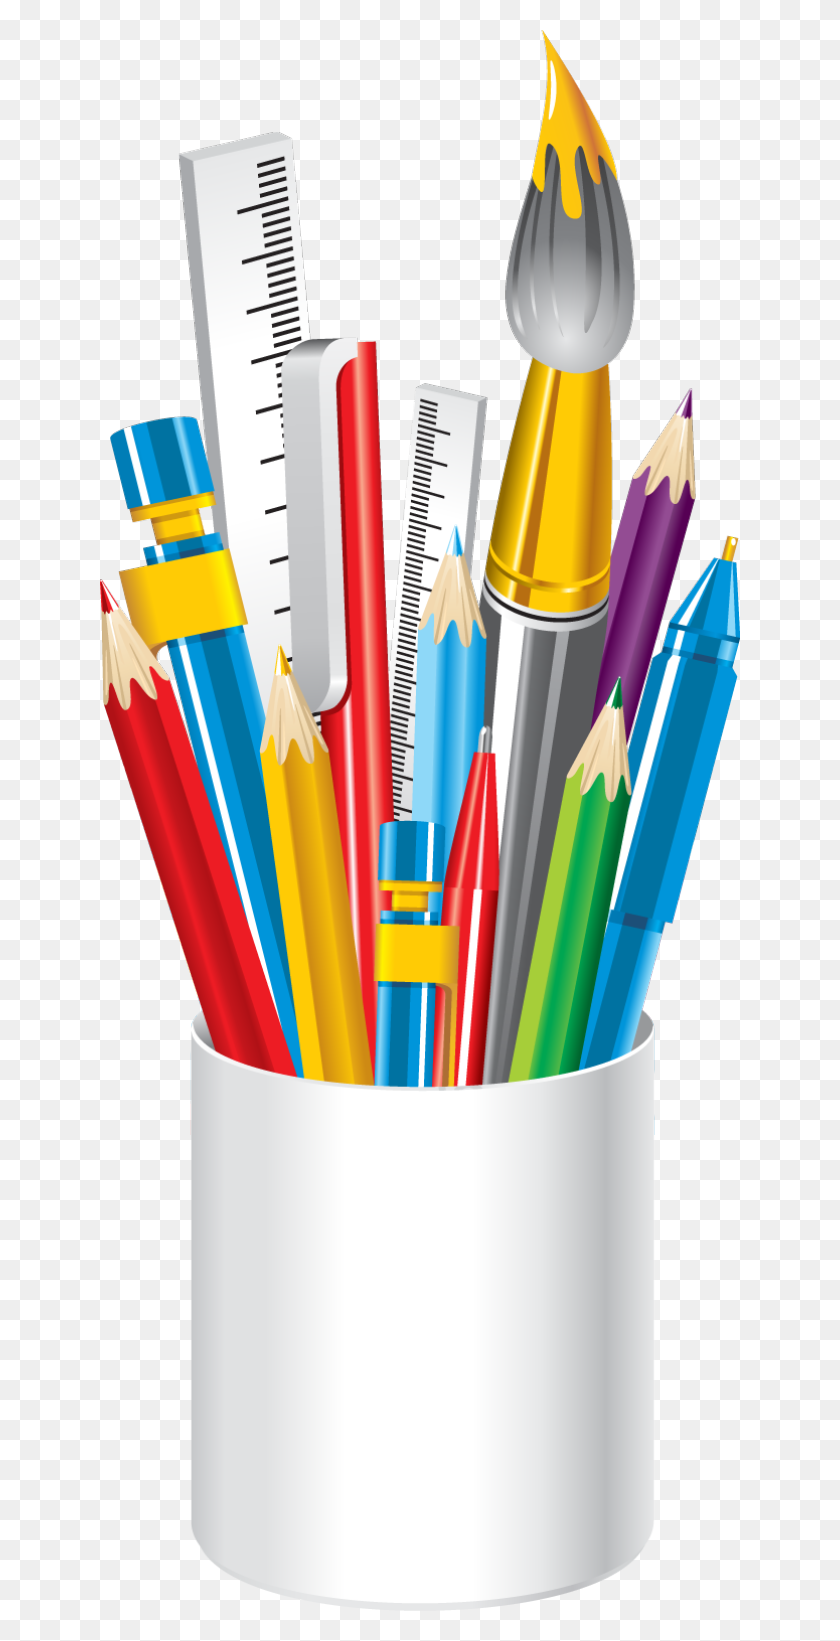 640x1581 School Supplies Clipart Png Clipart Station - School Supplies PNG